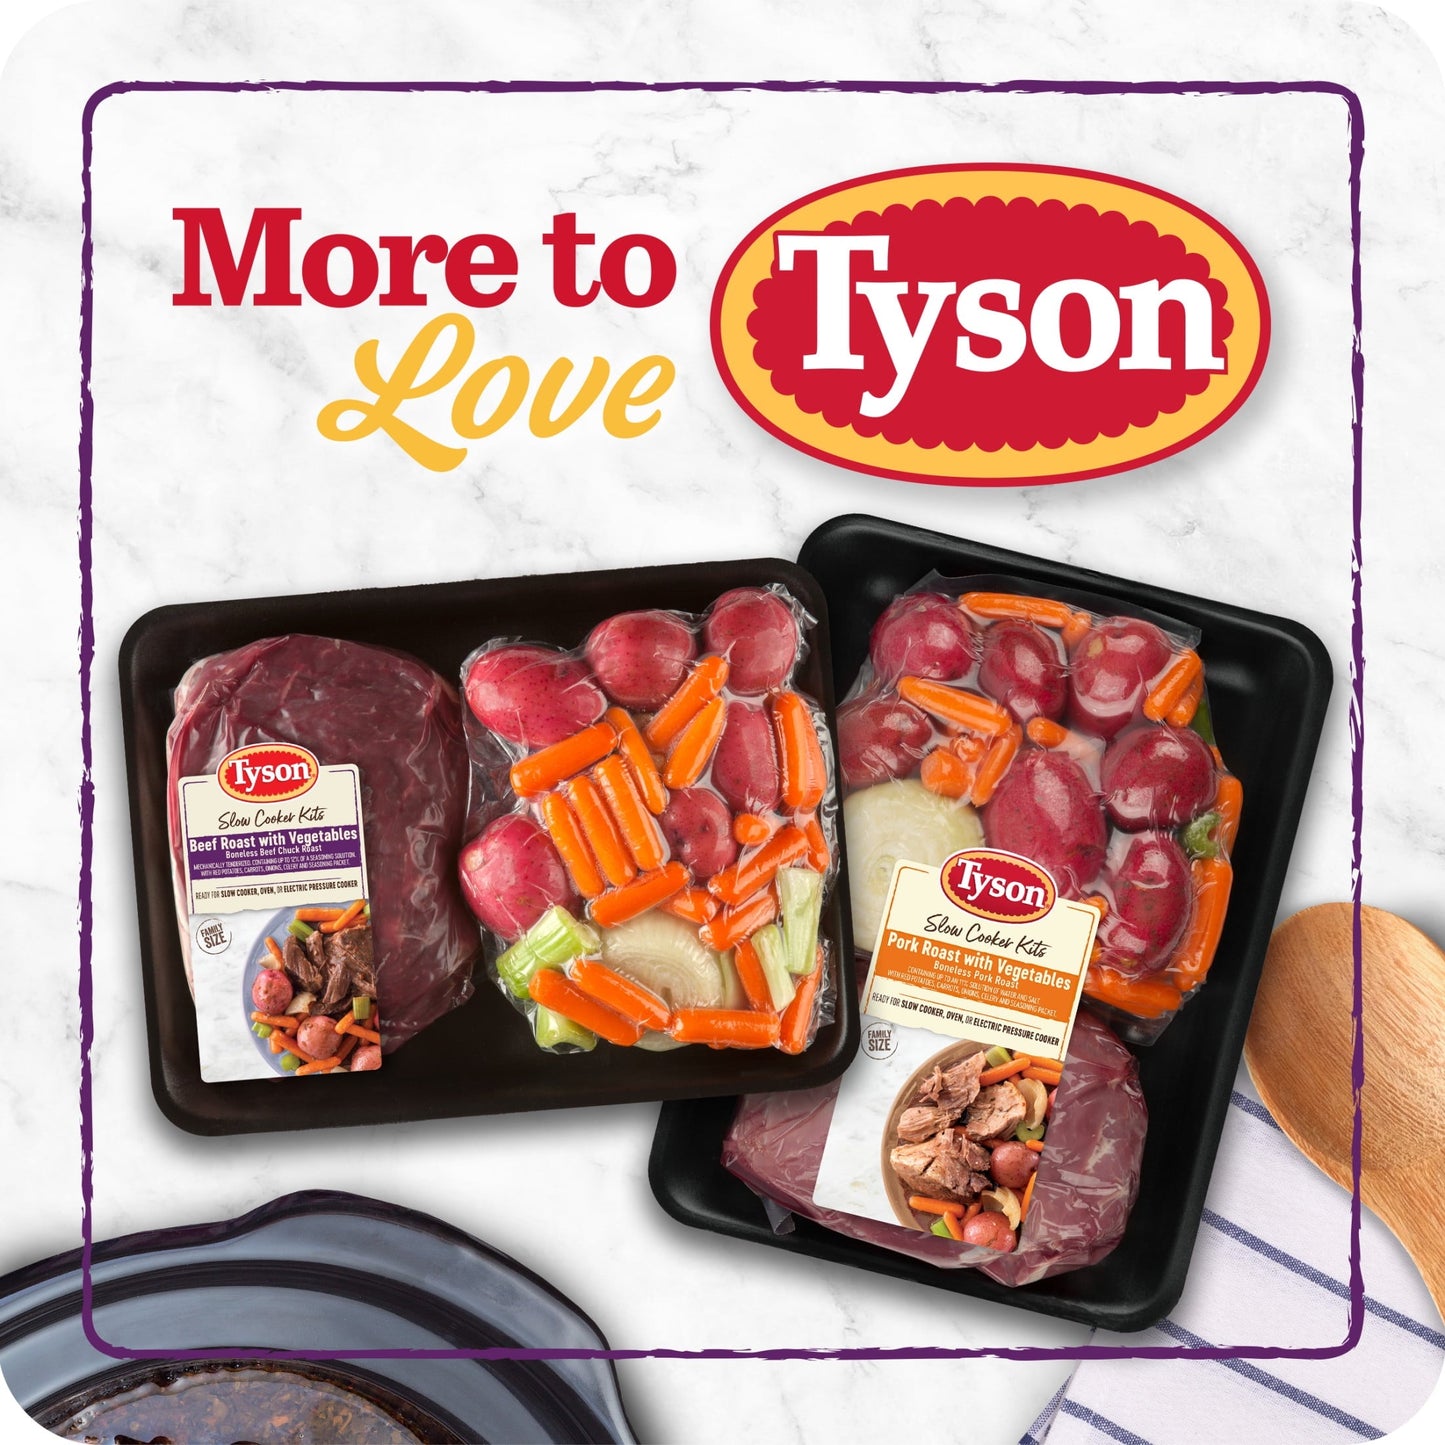 Tyson Ready for Slow Cooker Beef Chuck Roast with Vegetables Meal Kit Boneless Tray